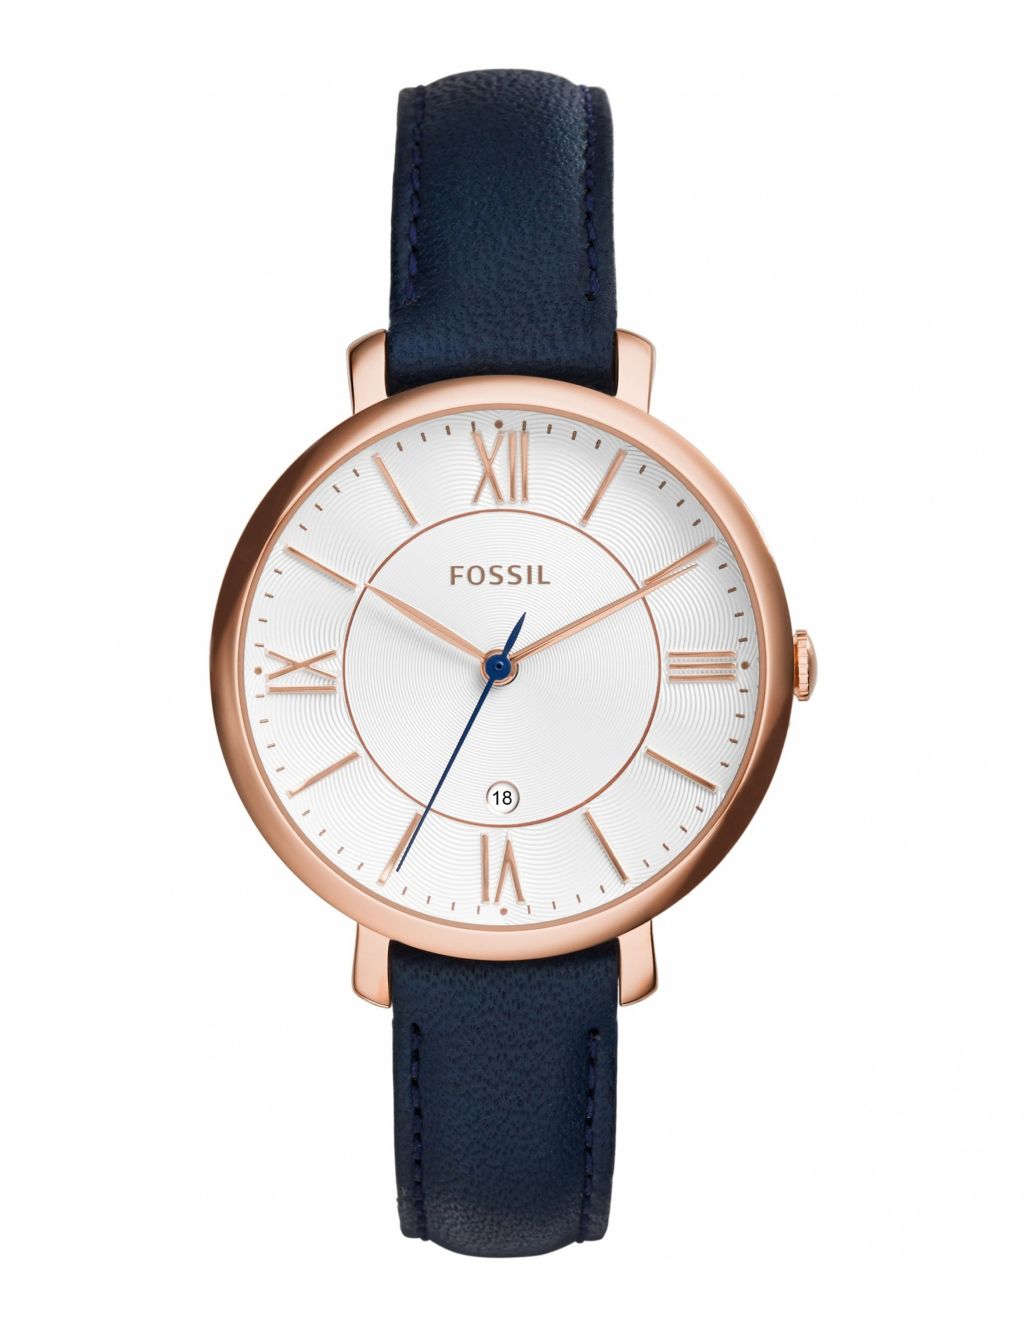 Fossil Jacqueline Navy Leather Watch image 1